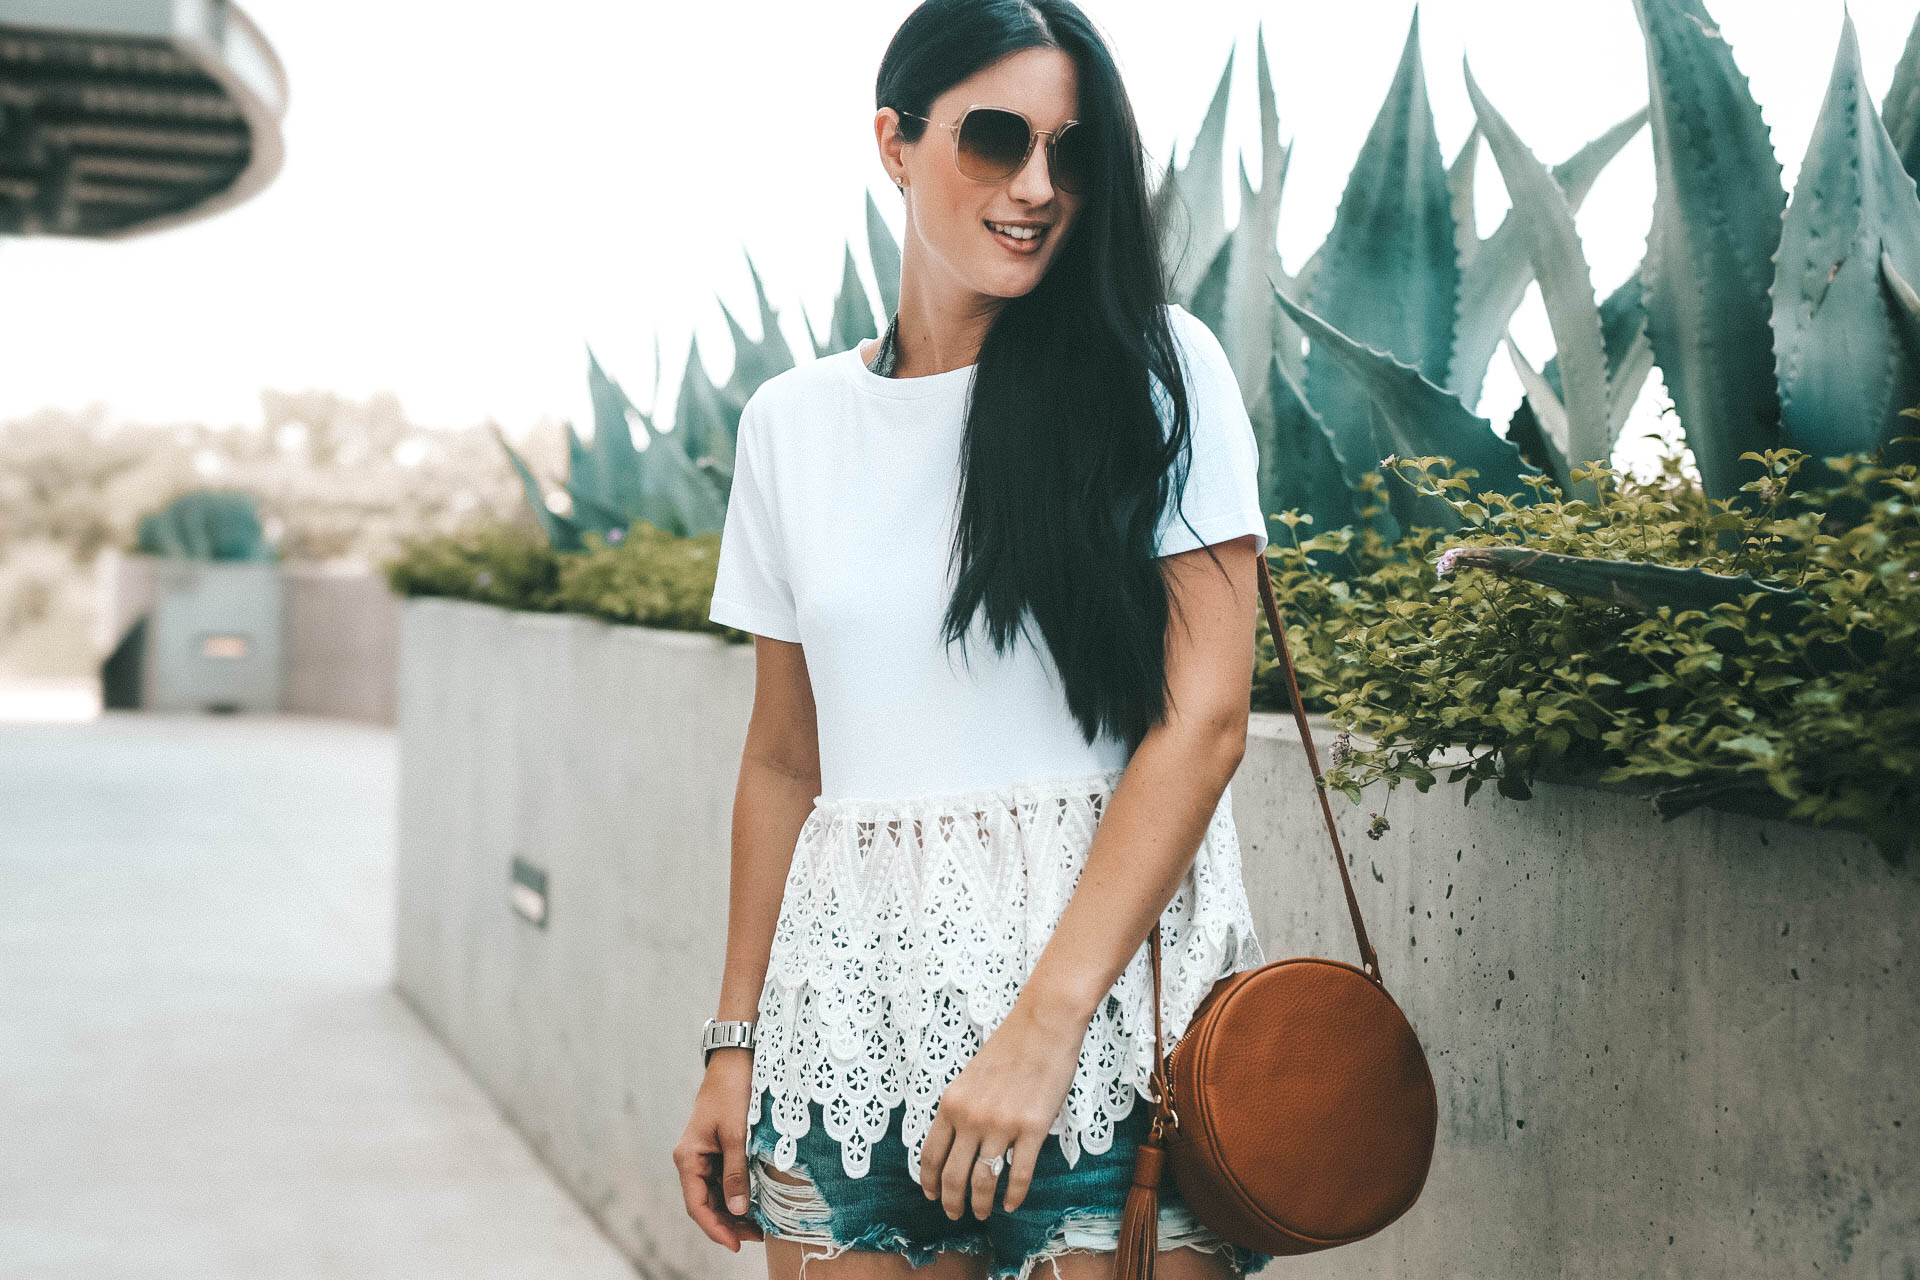 the perfect white lace peplum top for summer from Chicwish. It is under $30 and an affordable staple top. - {How to Wear a Crochet Peplum Top + Why They are so Flattering} featured by popular Austin fashion blogger Dressed to Kill